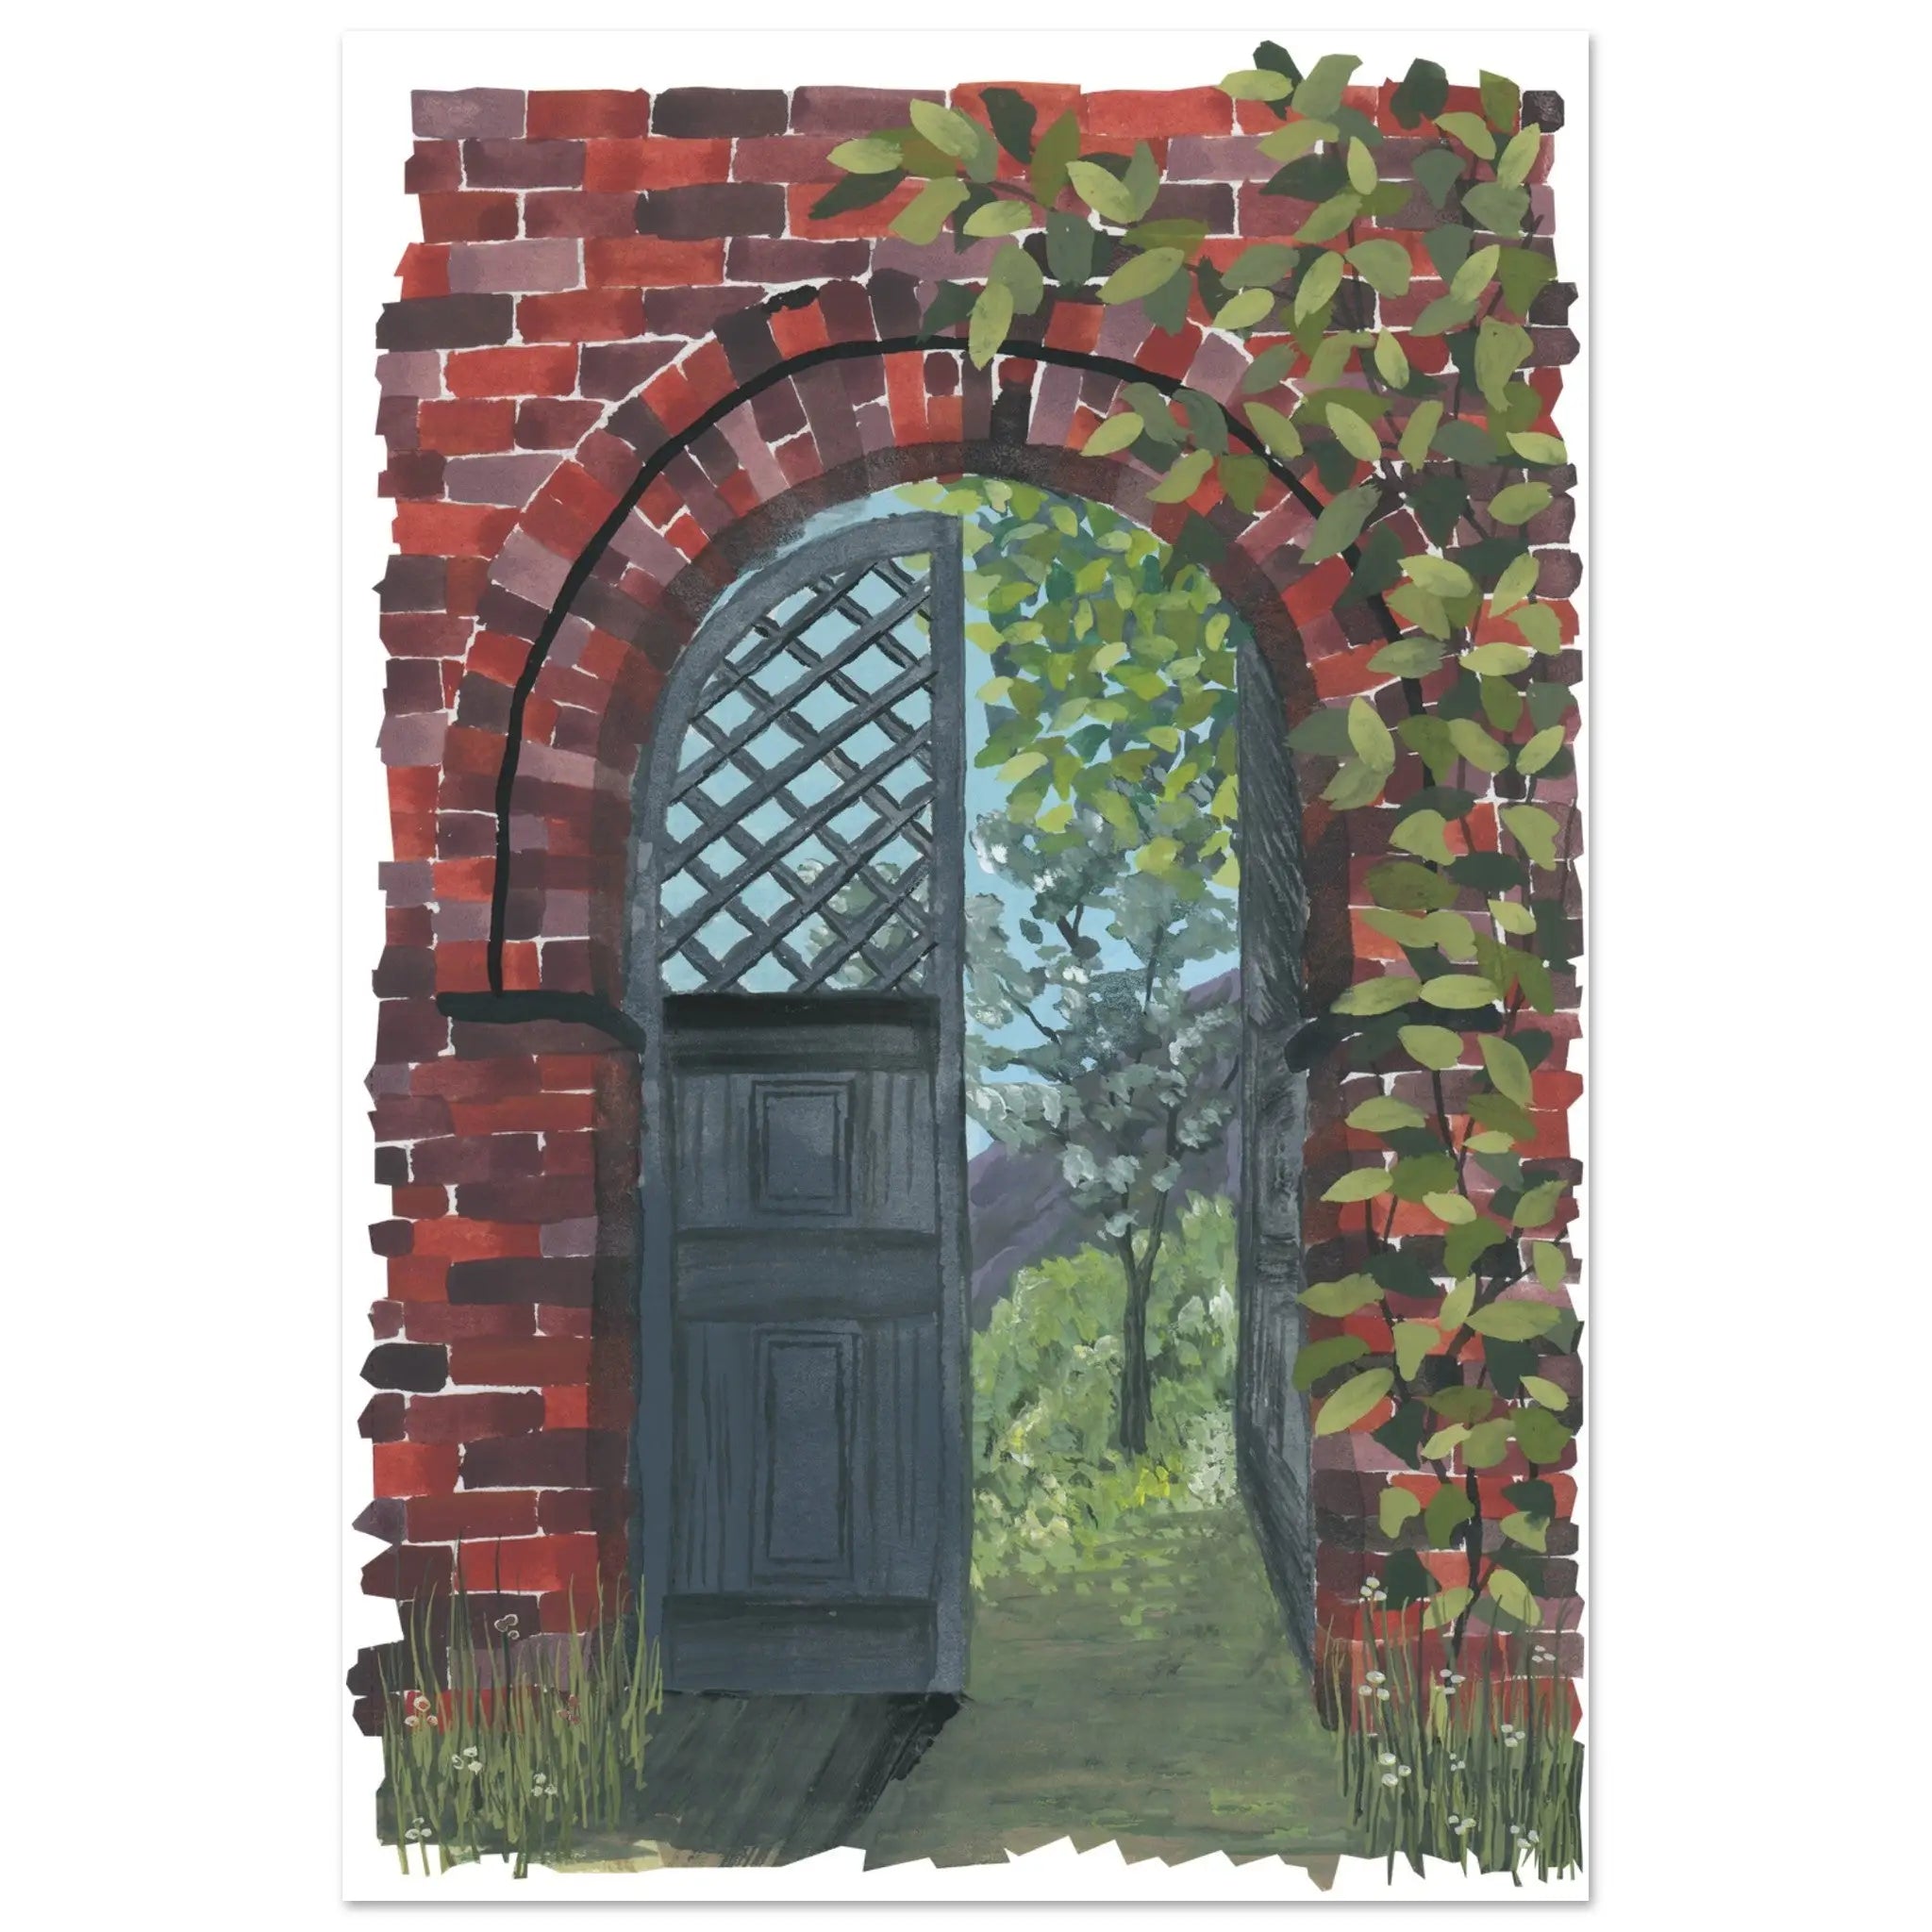 High-quality Aluminium Print showcasing a painting of an open door with a green vine growing out of it - ensure premium materials